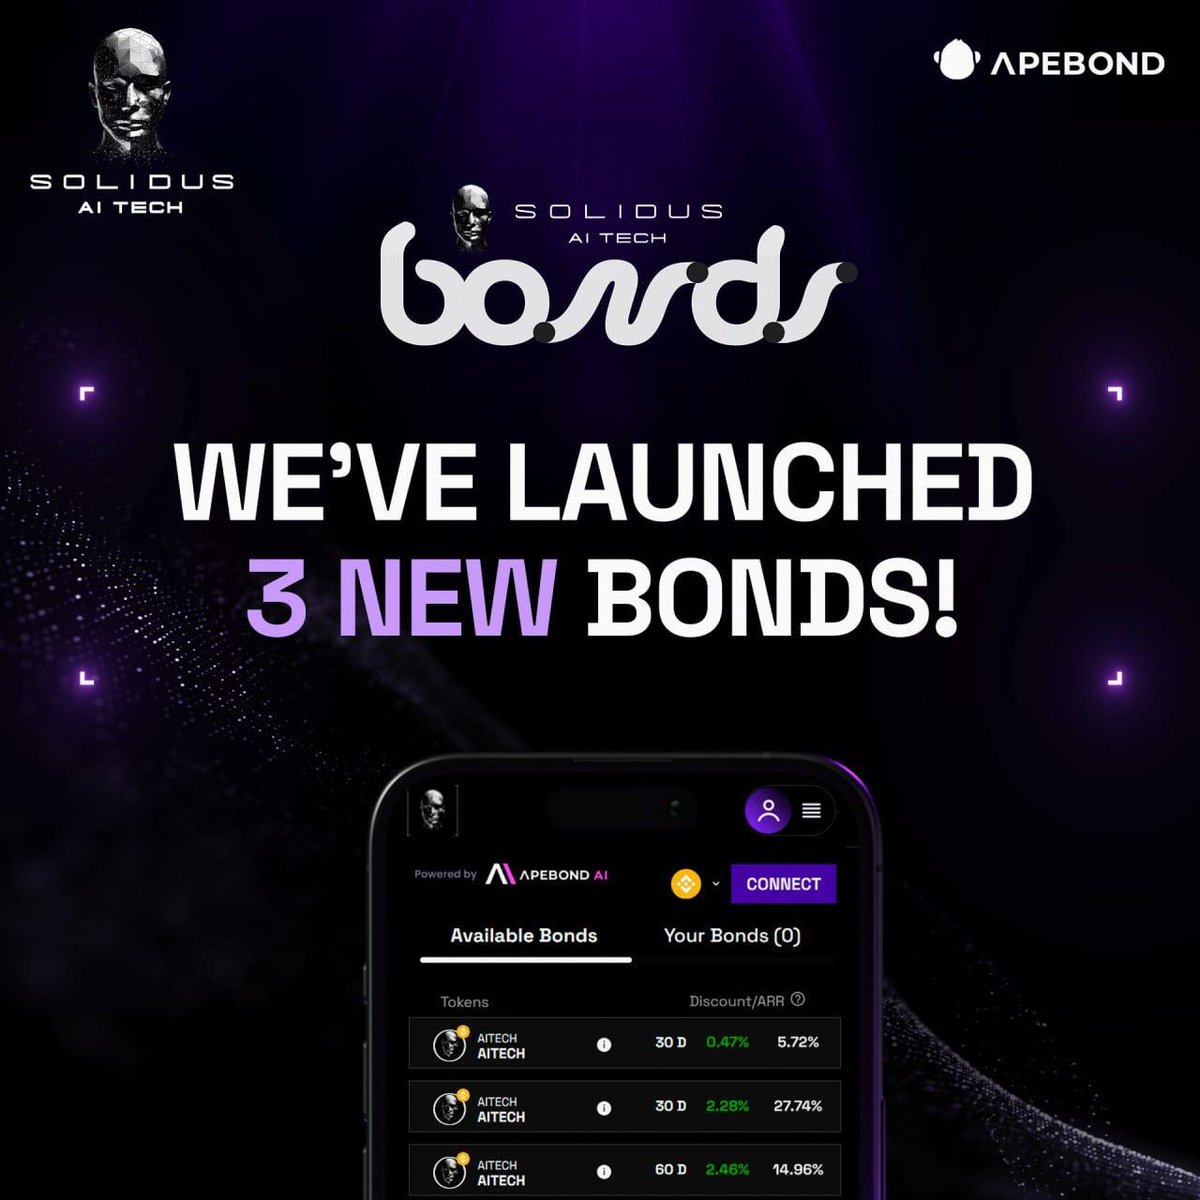 💥 3 New Bonds by AITECH!

💫 AITECH has launched three new bonds tailored specifically for its vibrant community. These bonds aim to strengthen AITECH and its community, facilitating growth and, innovation. The community members can purchase these bonds at a discounted price and